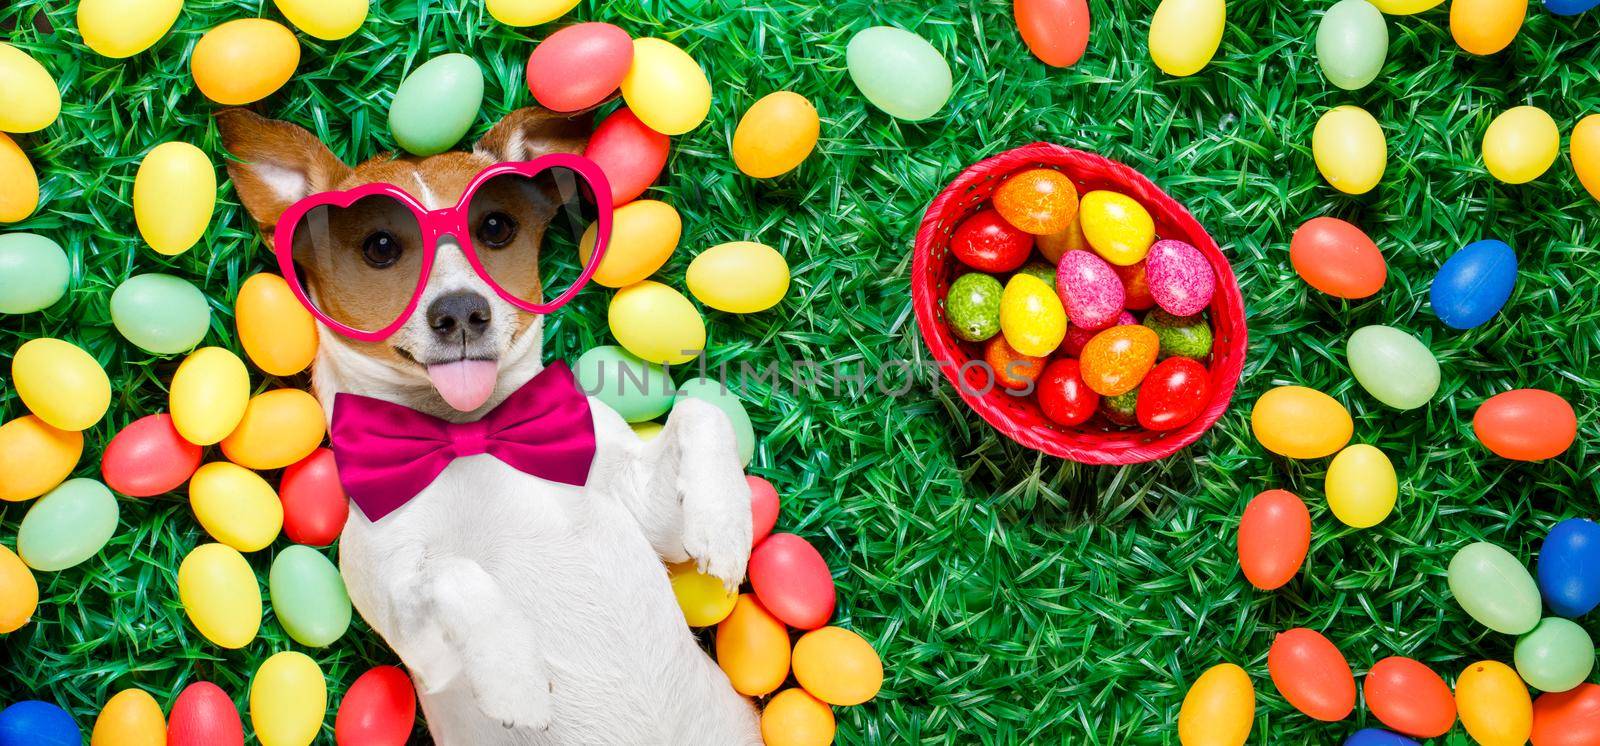 funny jack russell easter bunny  dog with eggs around on grass sticking out tongue  full basket to the side